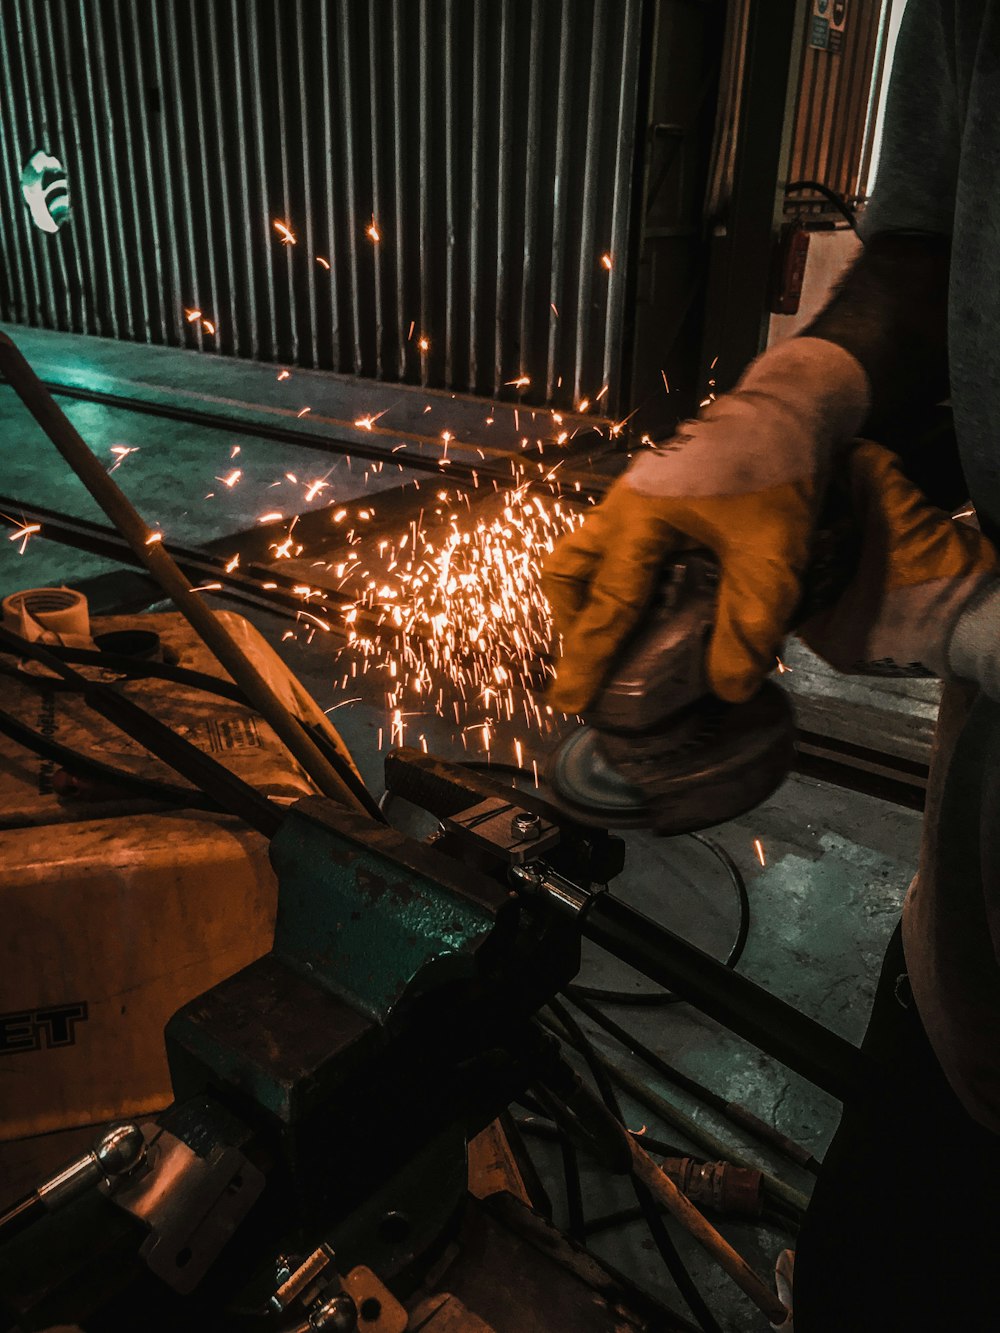 person grinding metal using angle grinder